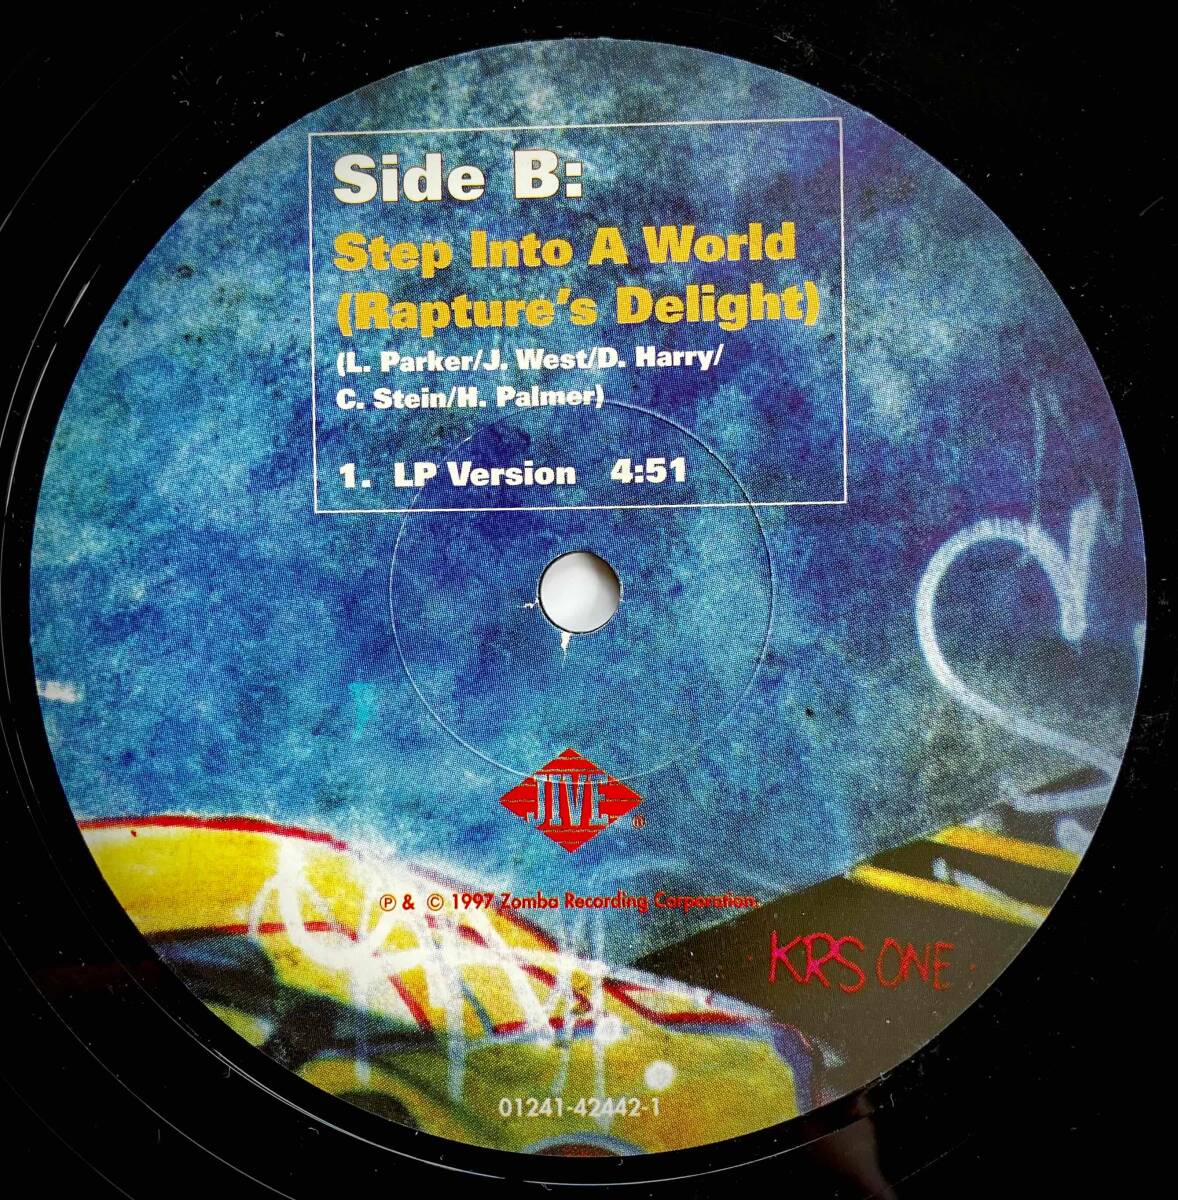 KRS ONE / Step Into A World (Rapture's Delight)【12''】1997 / US / Jive / 01241-42442-1の画像4